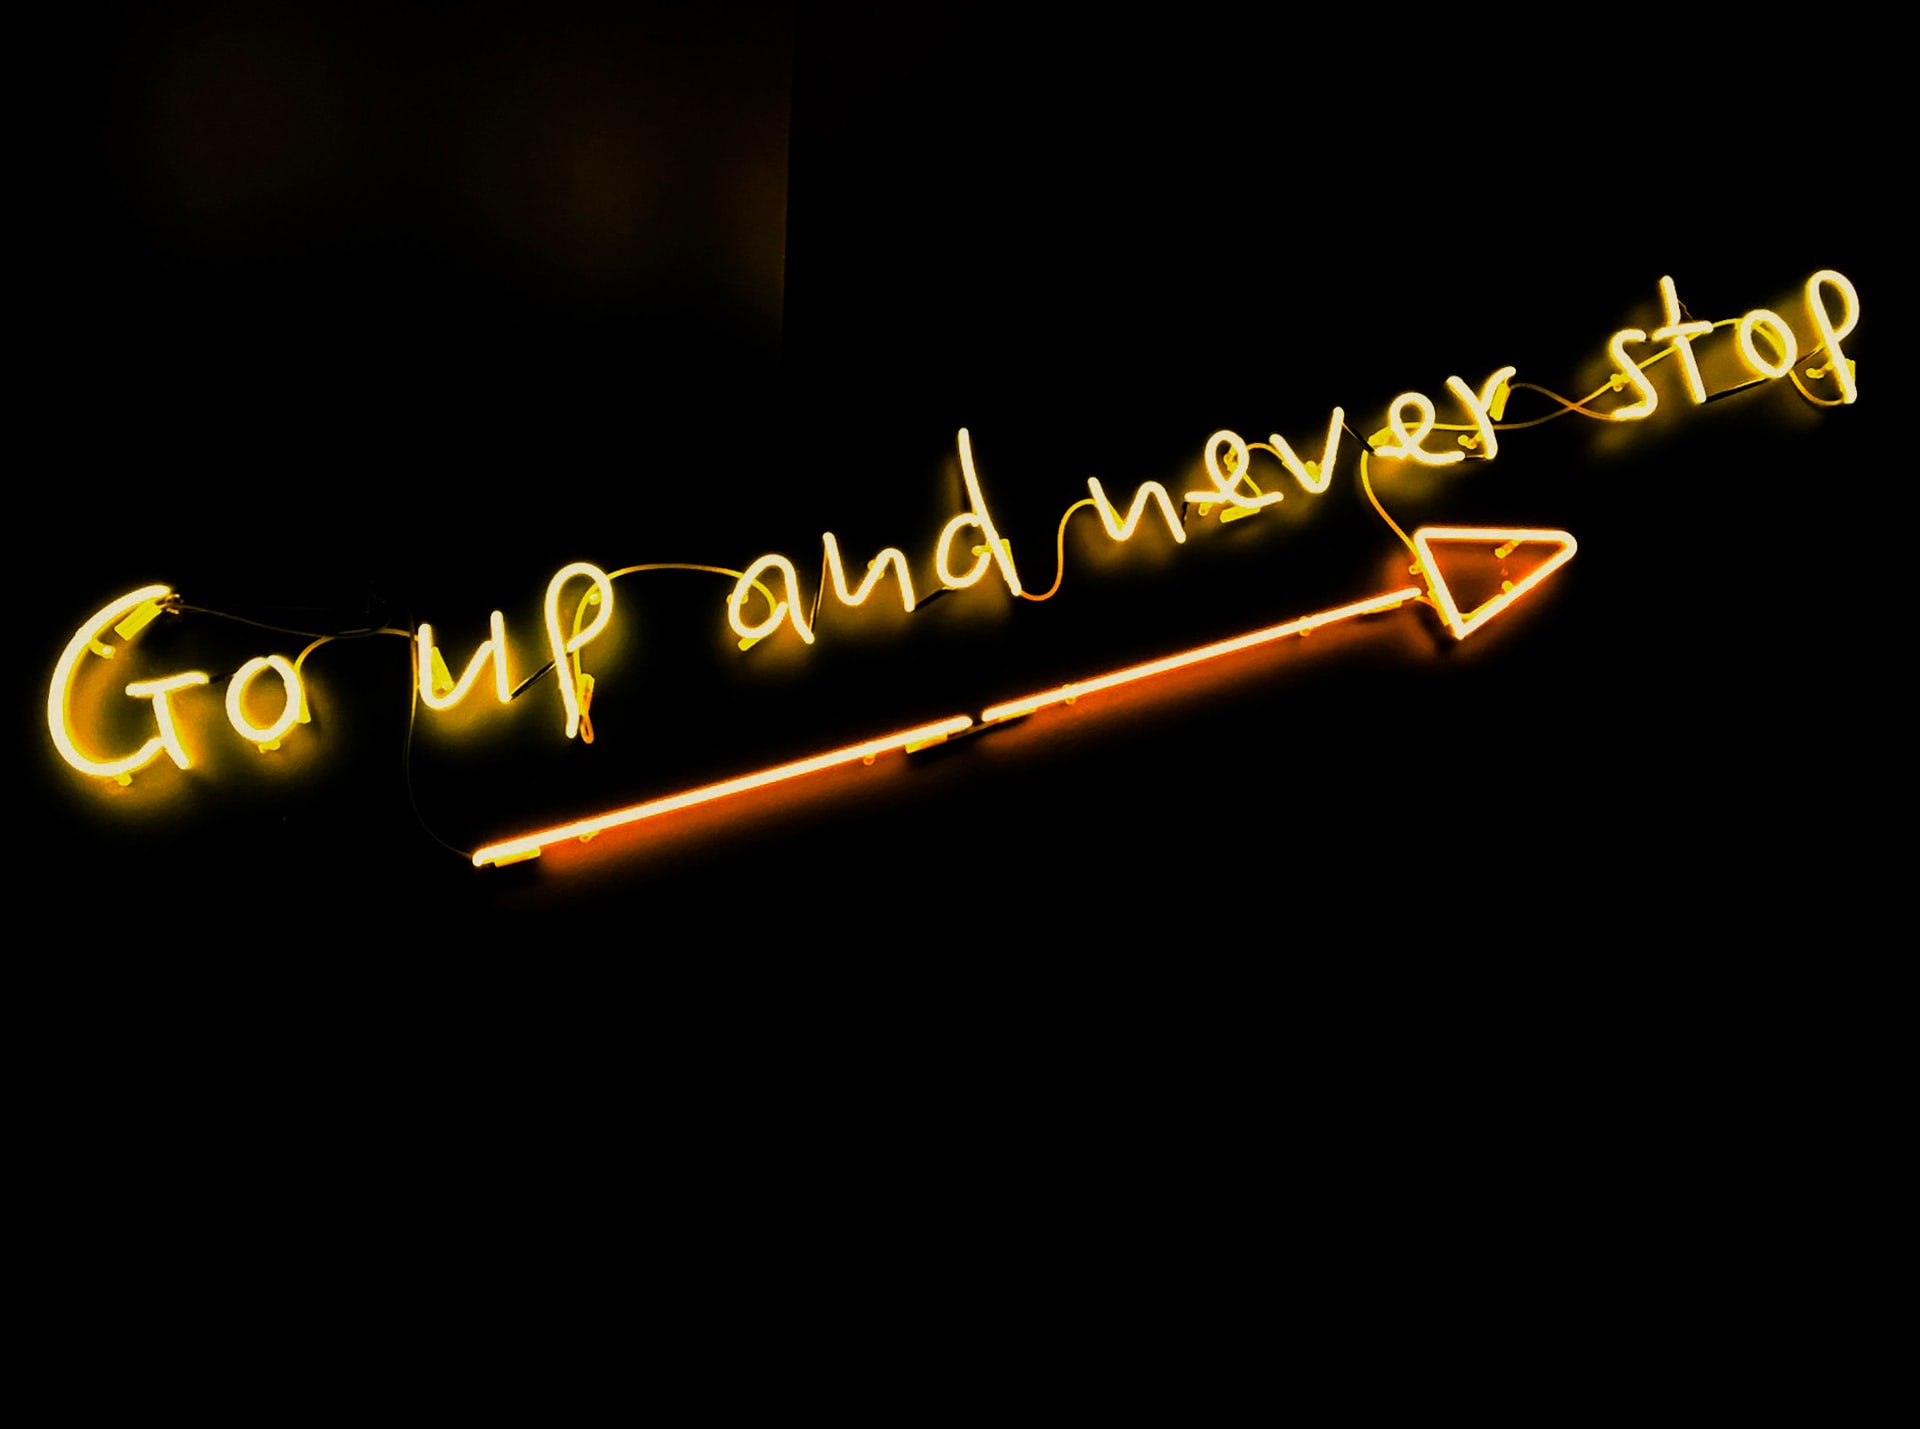 neon saying 'go up and never stop'